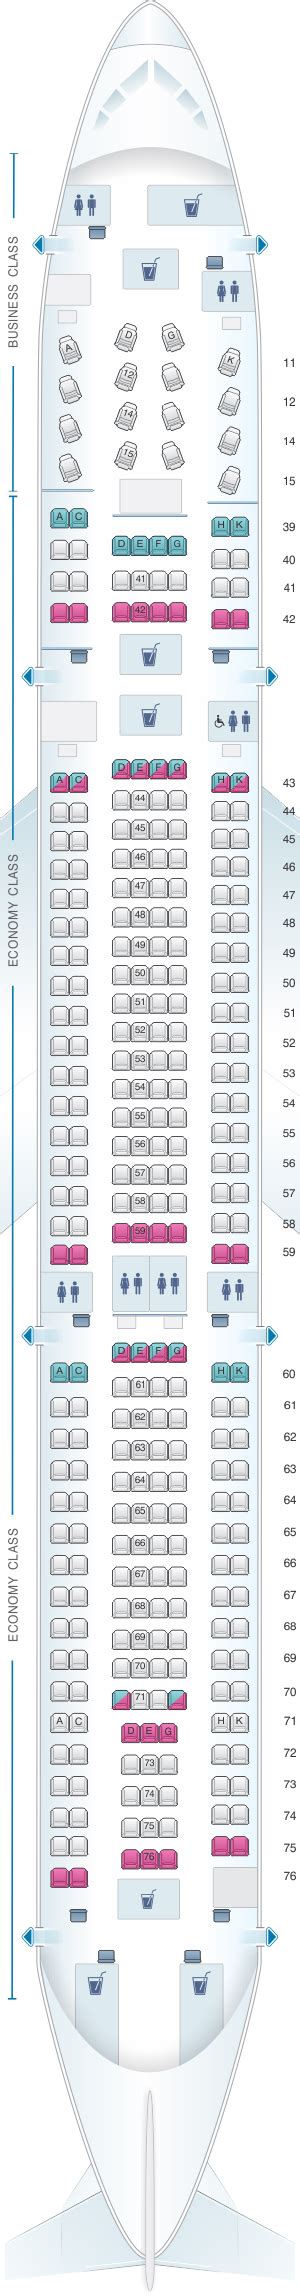 Seat Map Cathay Pacific Airways Airbus A330 300 33p